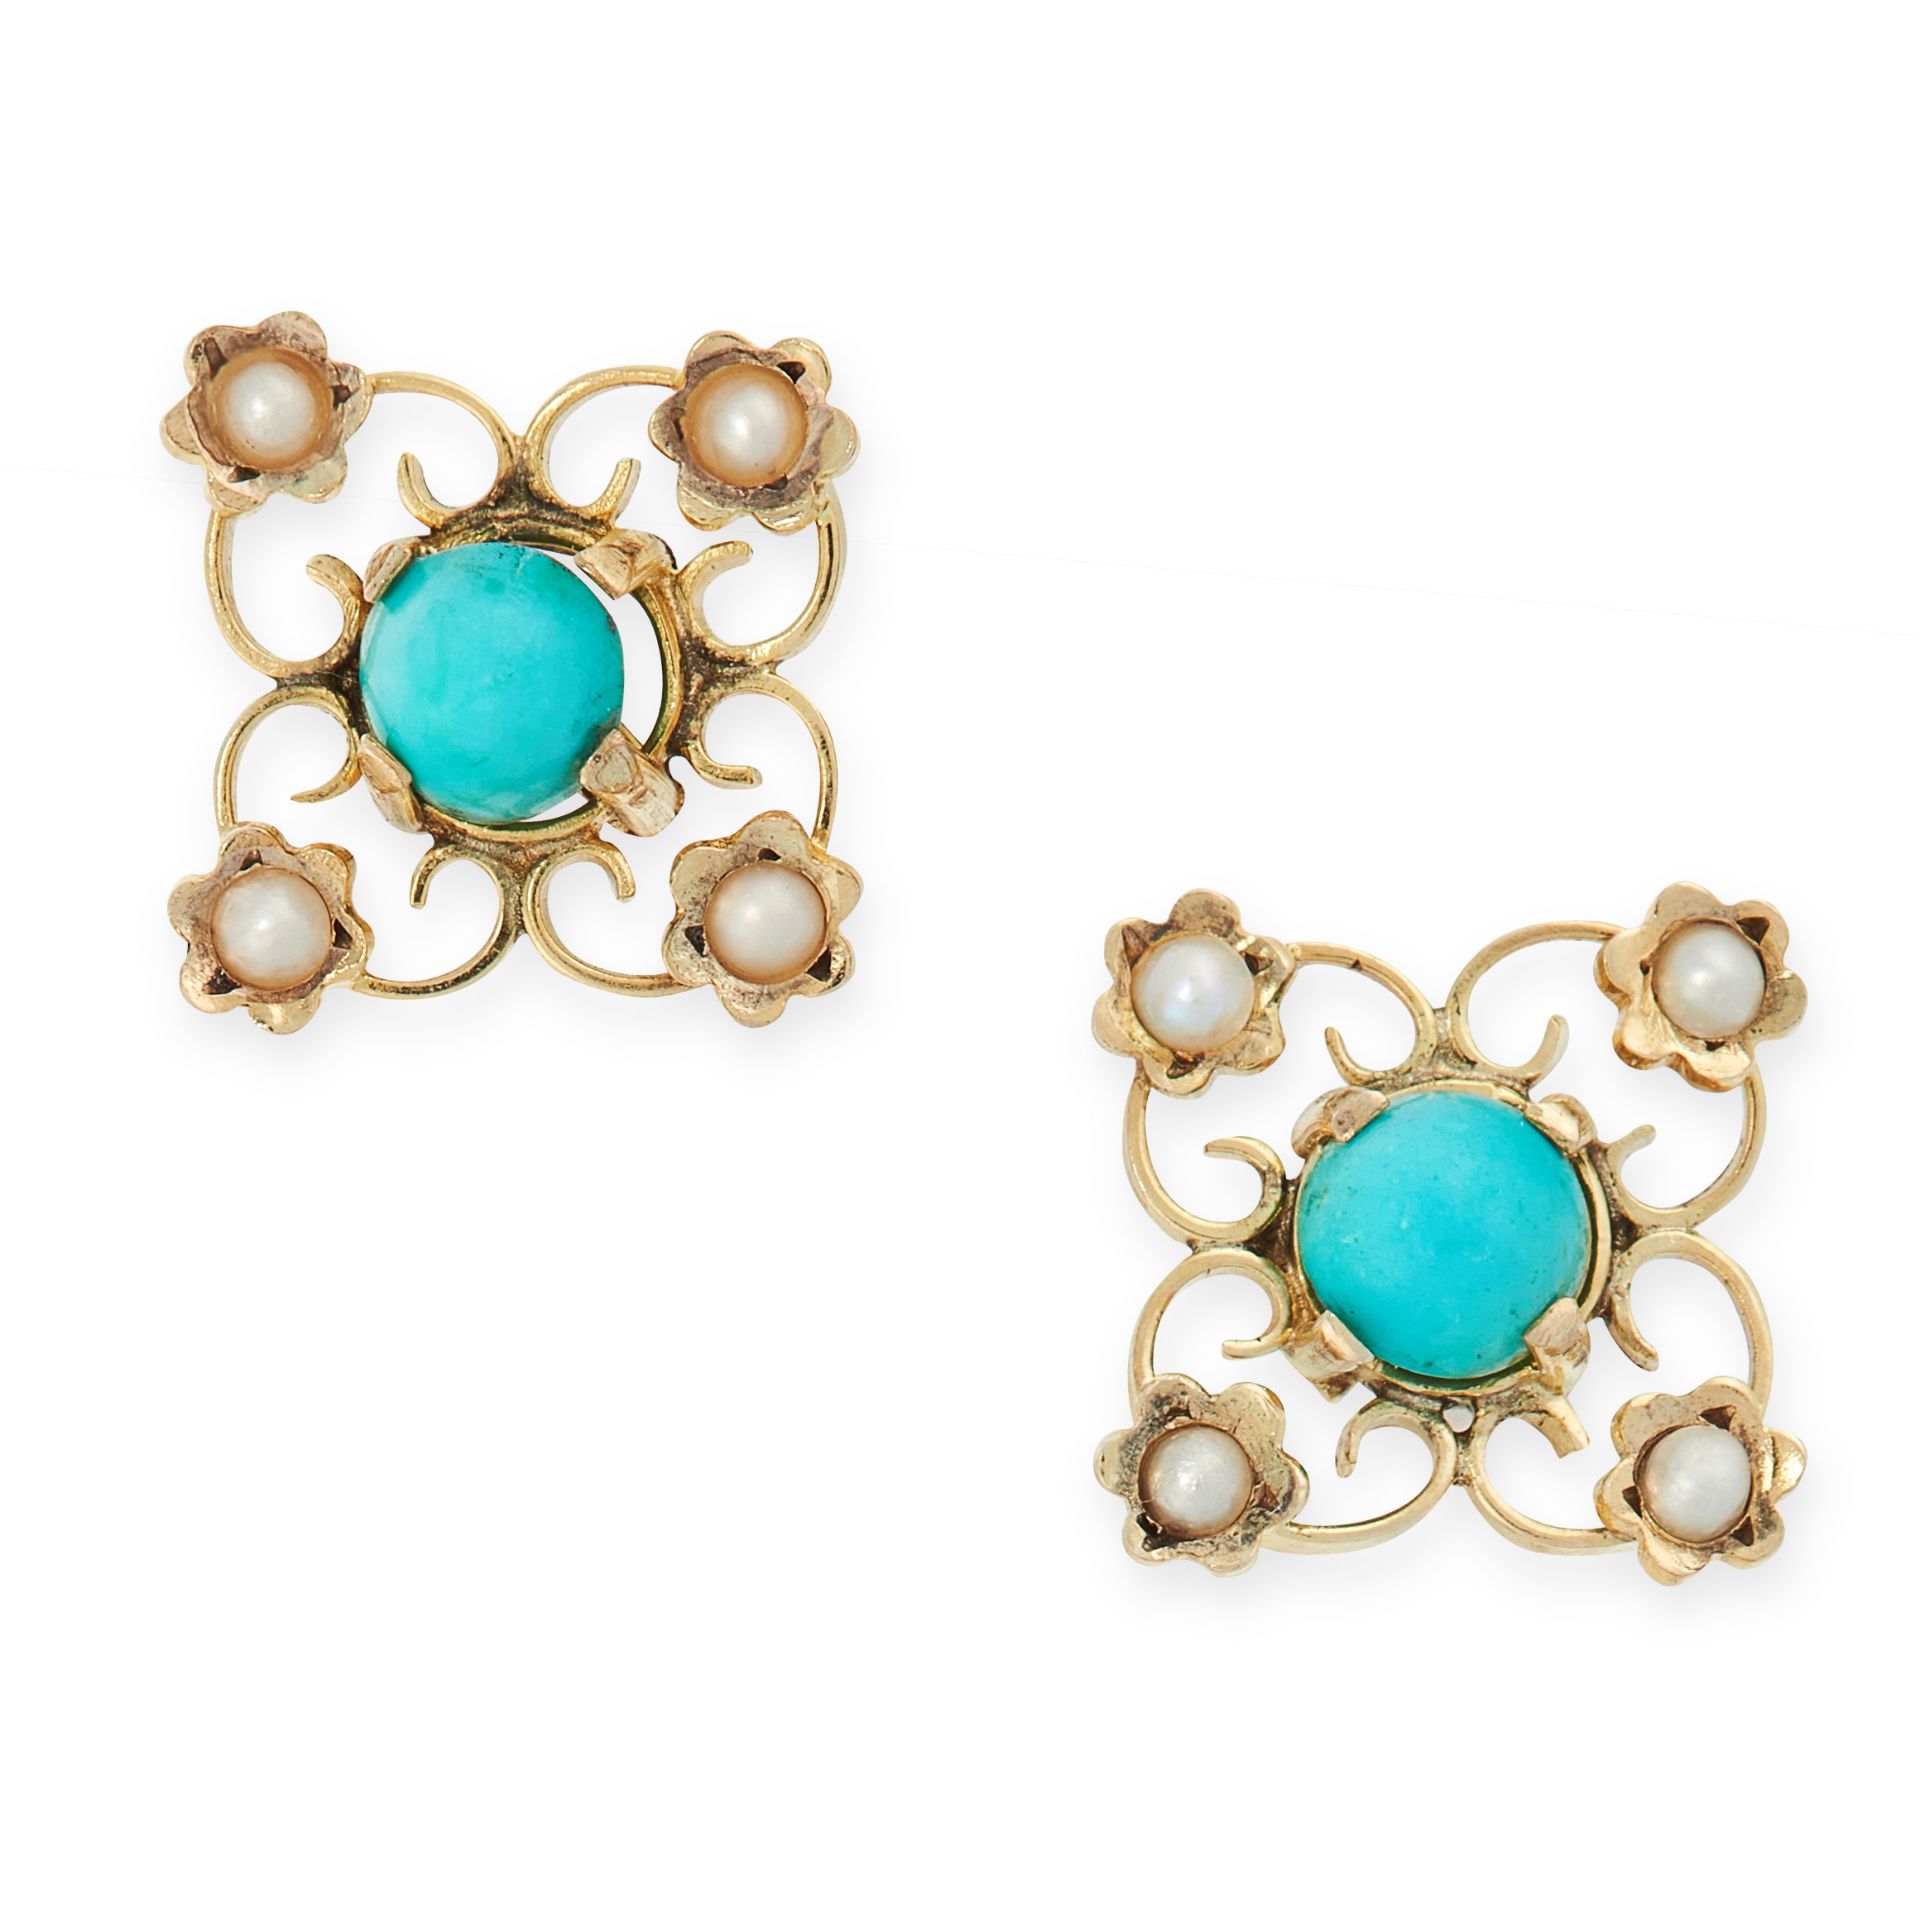 A PAIR OF ANTIQUE TURQUOISE AND PEARL STUD EARRINGS in yellow gold, each set with a cabochon